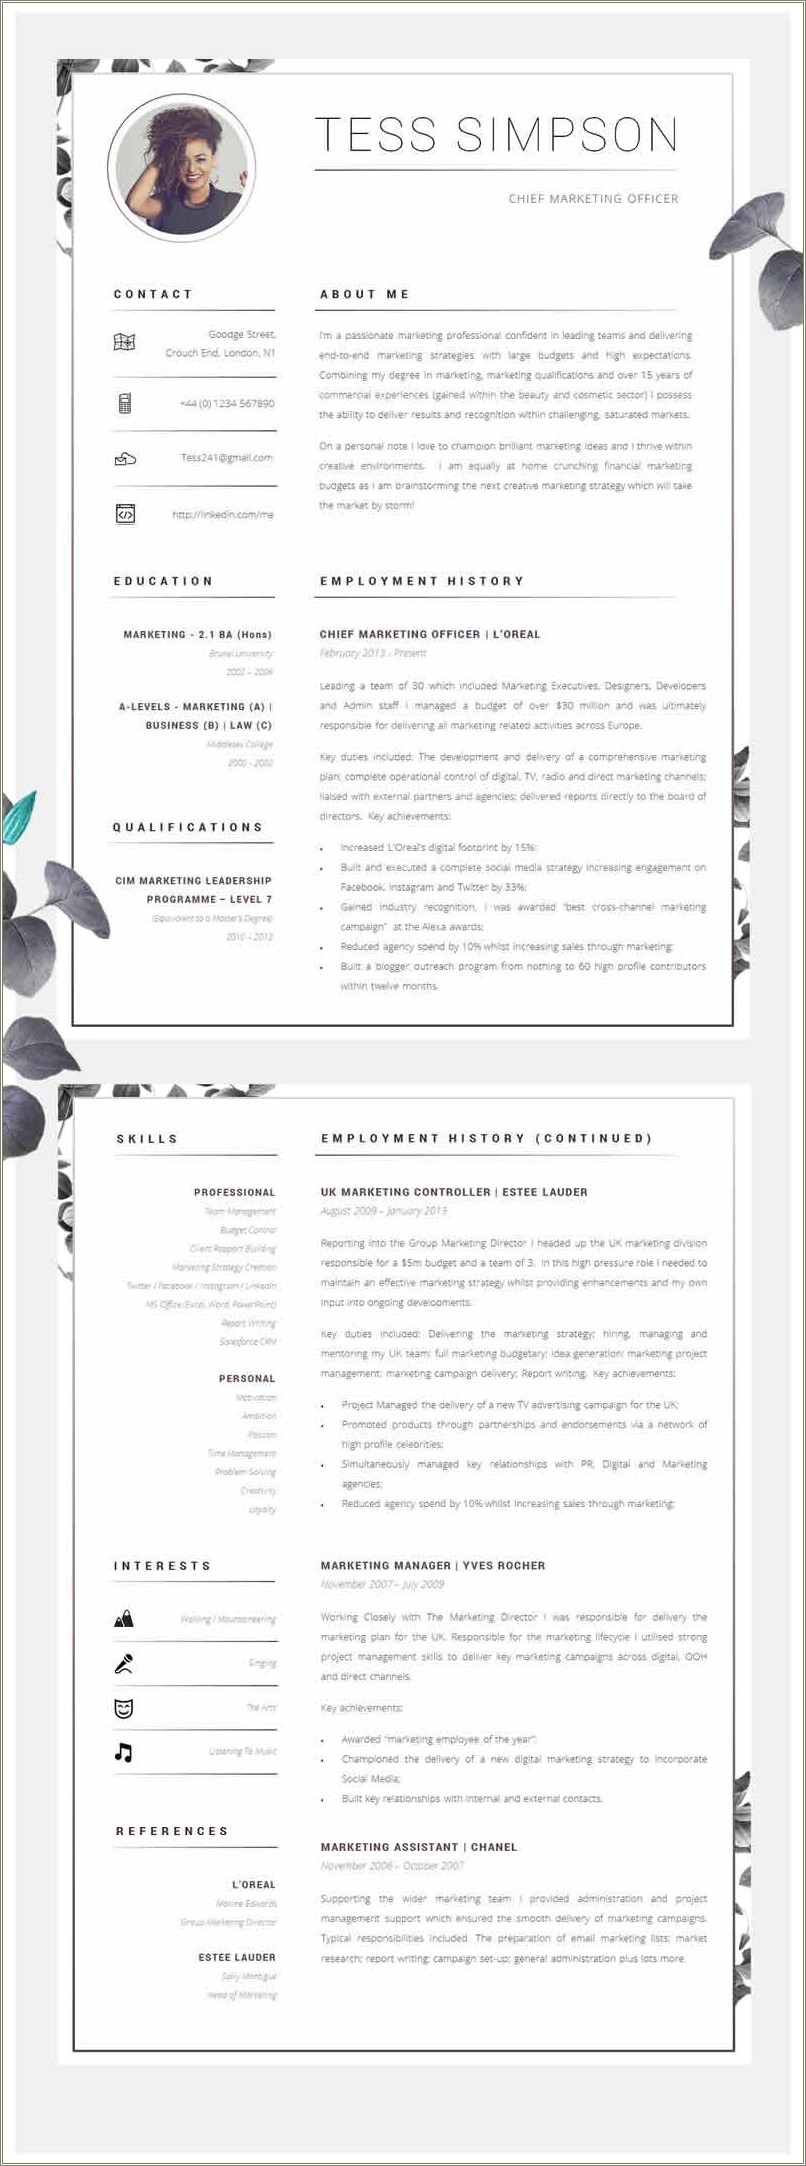 Examples Of The About Me Section On Resumes